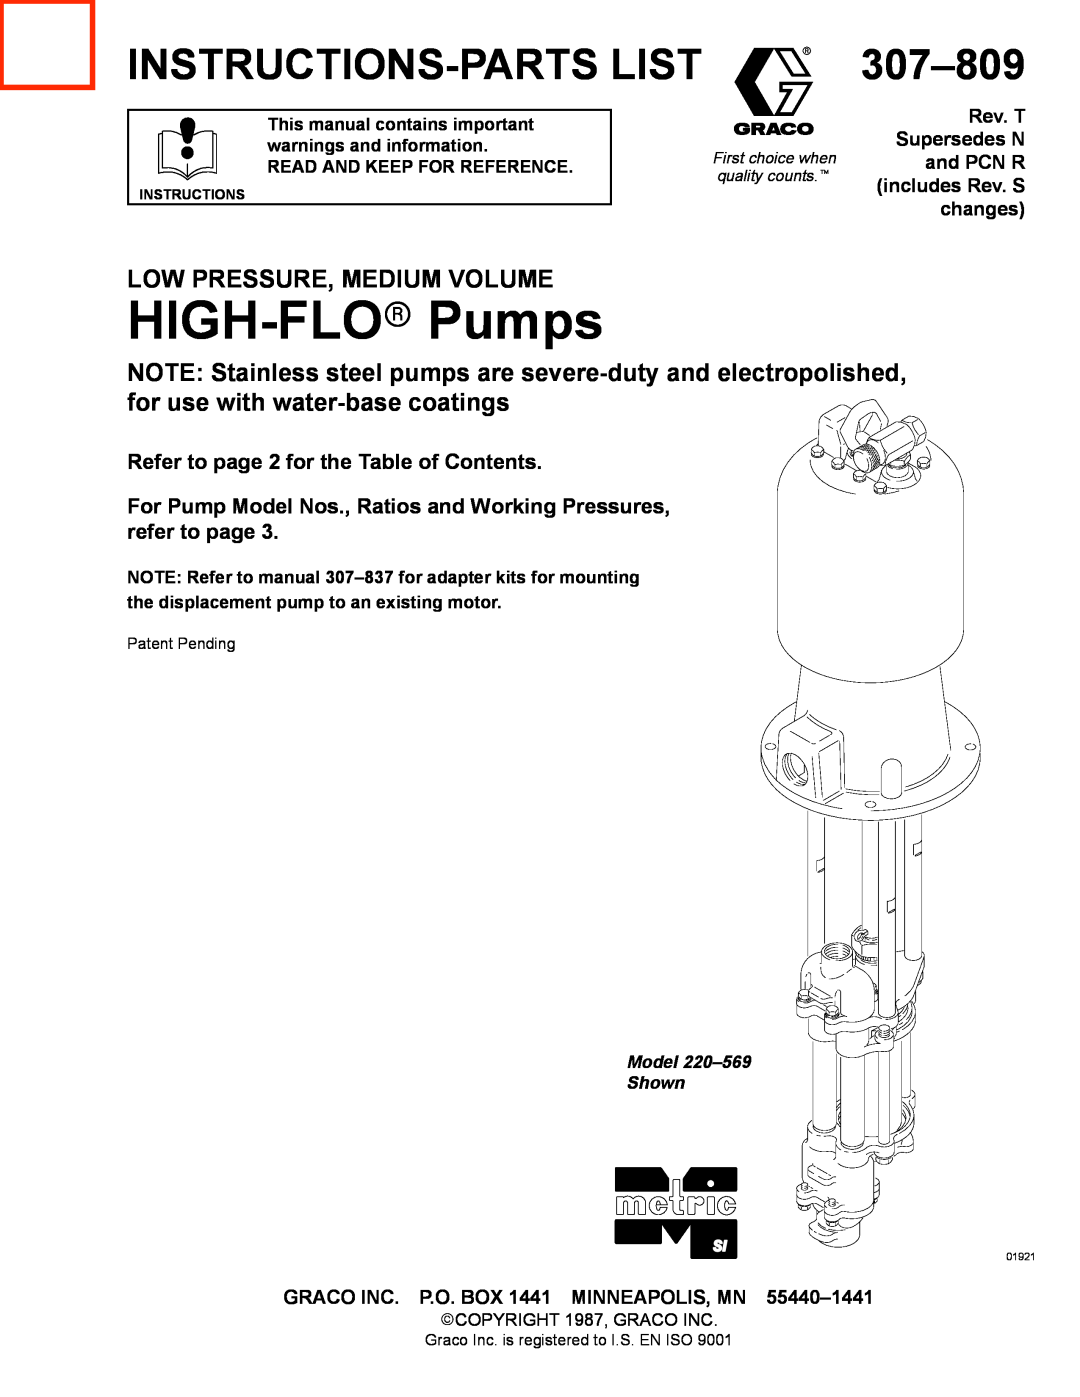 Graco 220-569 manual Instructions-Partslist, 307-809, Refer to page 2 for the Table of Contents, changes, HIGH-FLO Pumps 